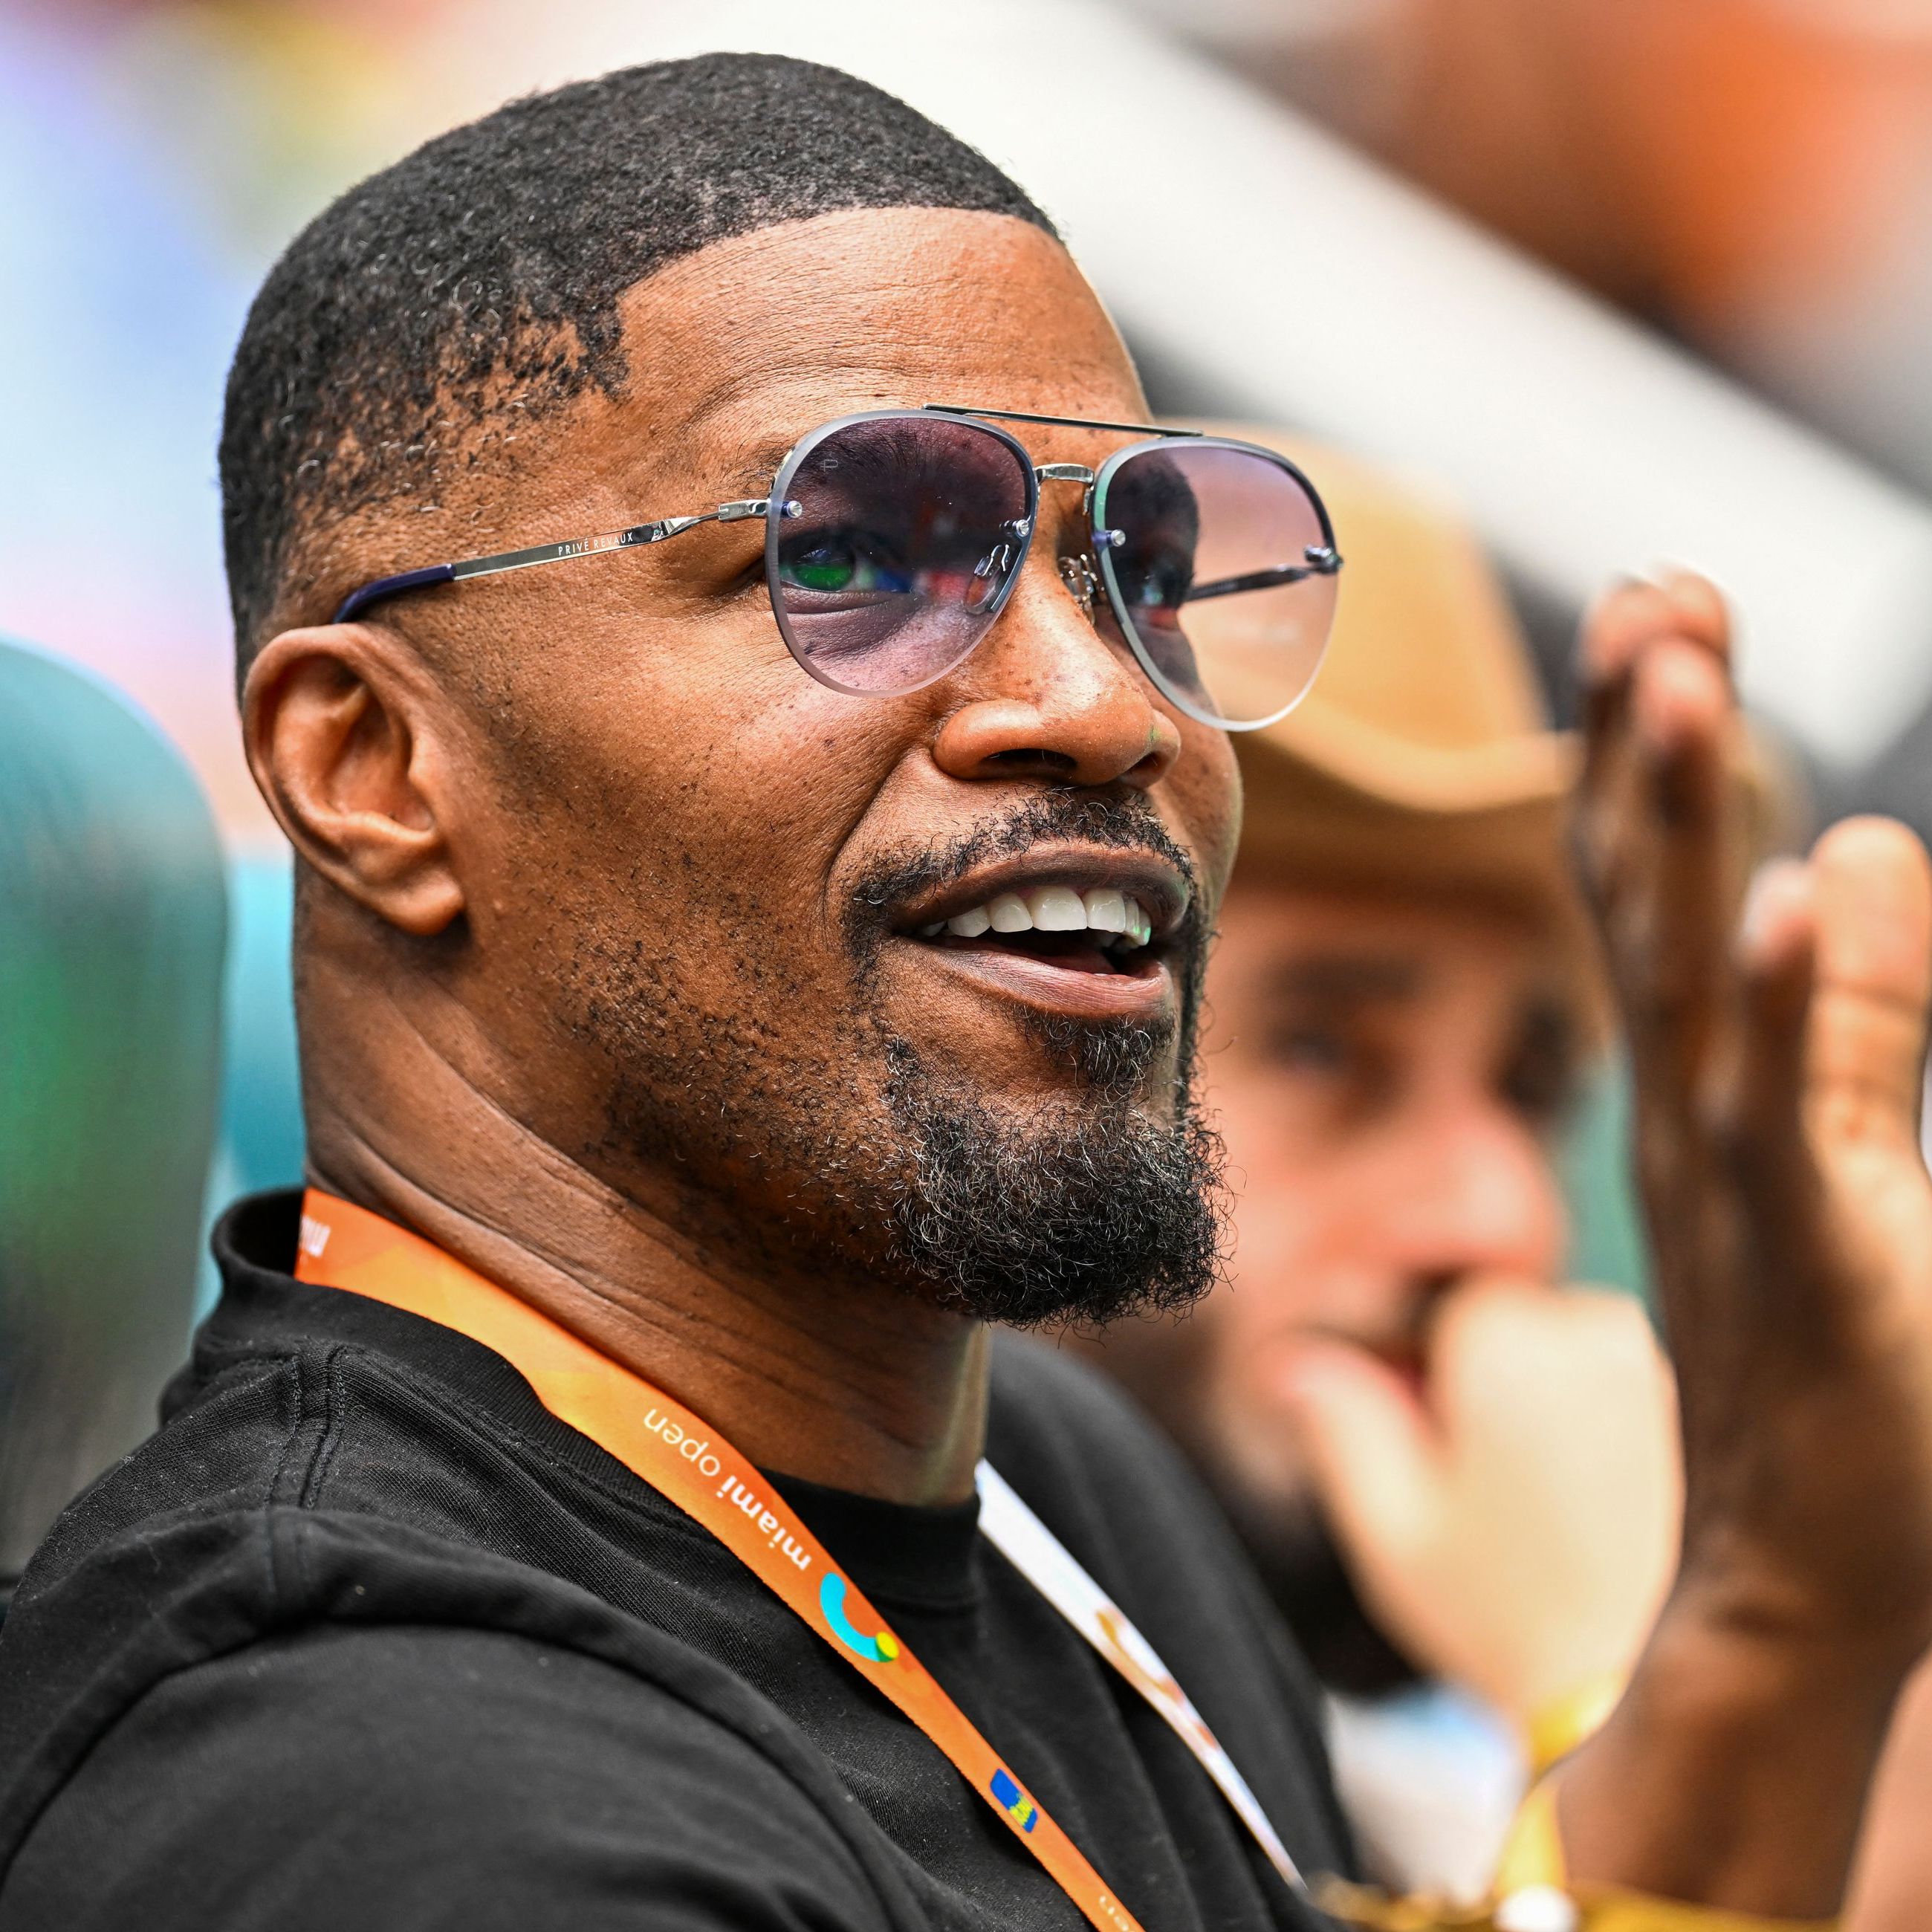 Jamie Foxx's Co-Star Just Shared a New Update on His Health